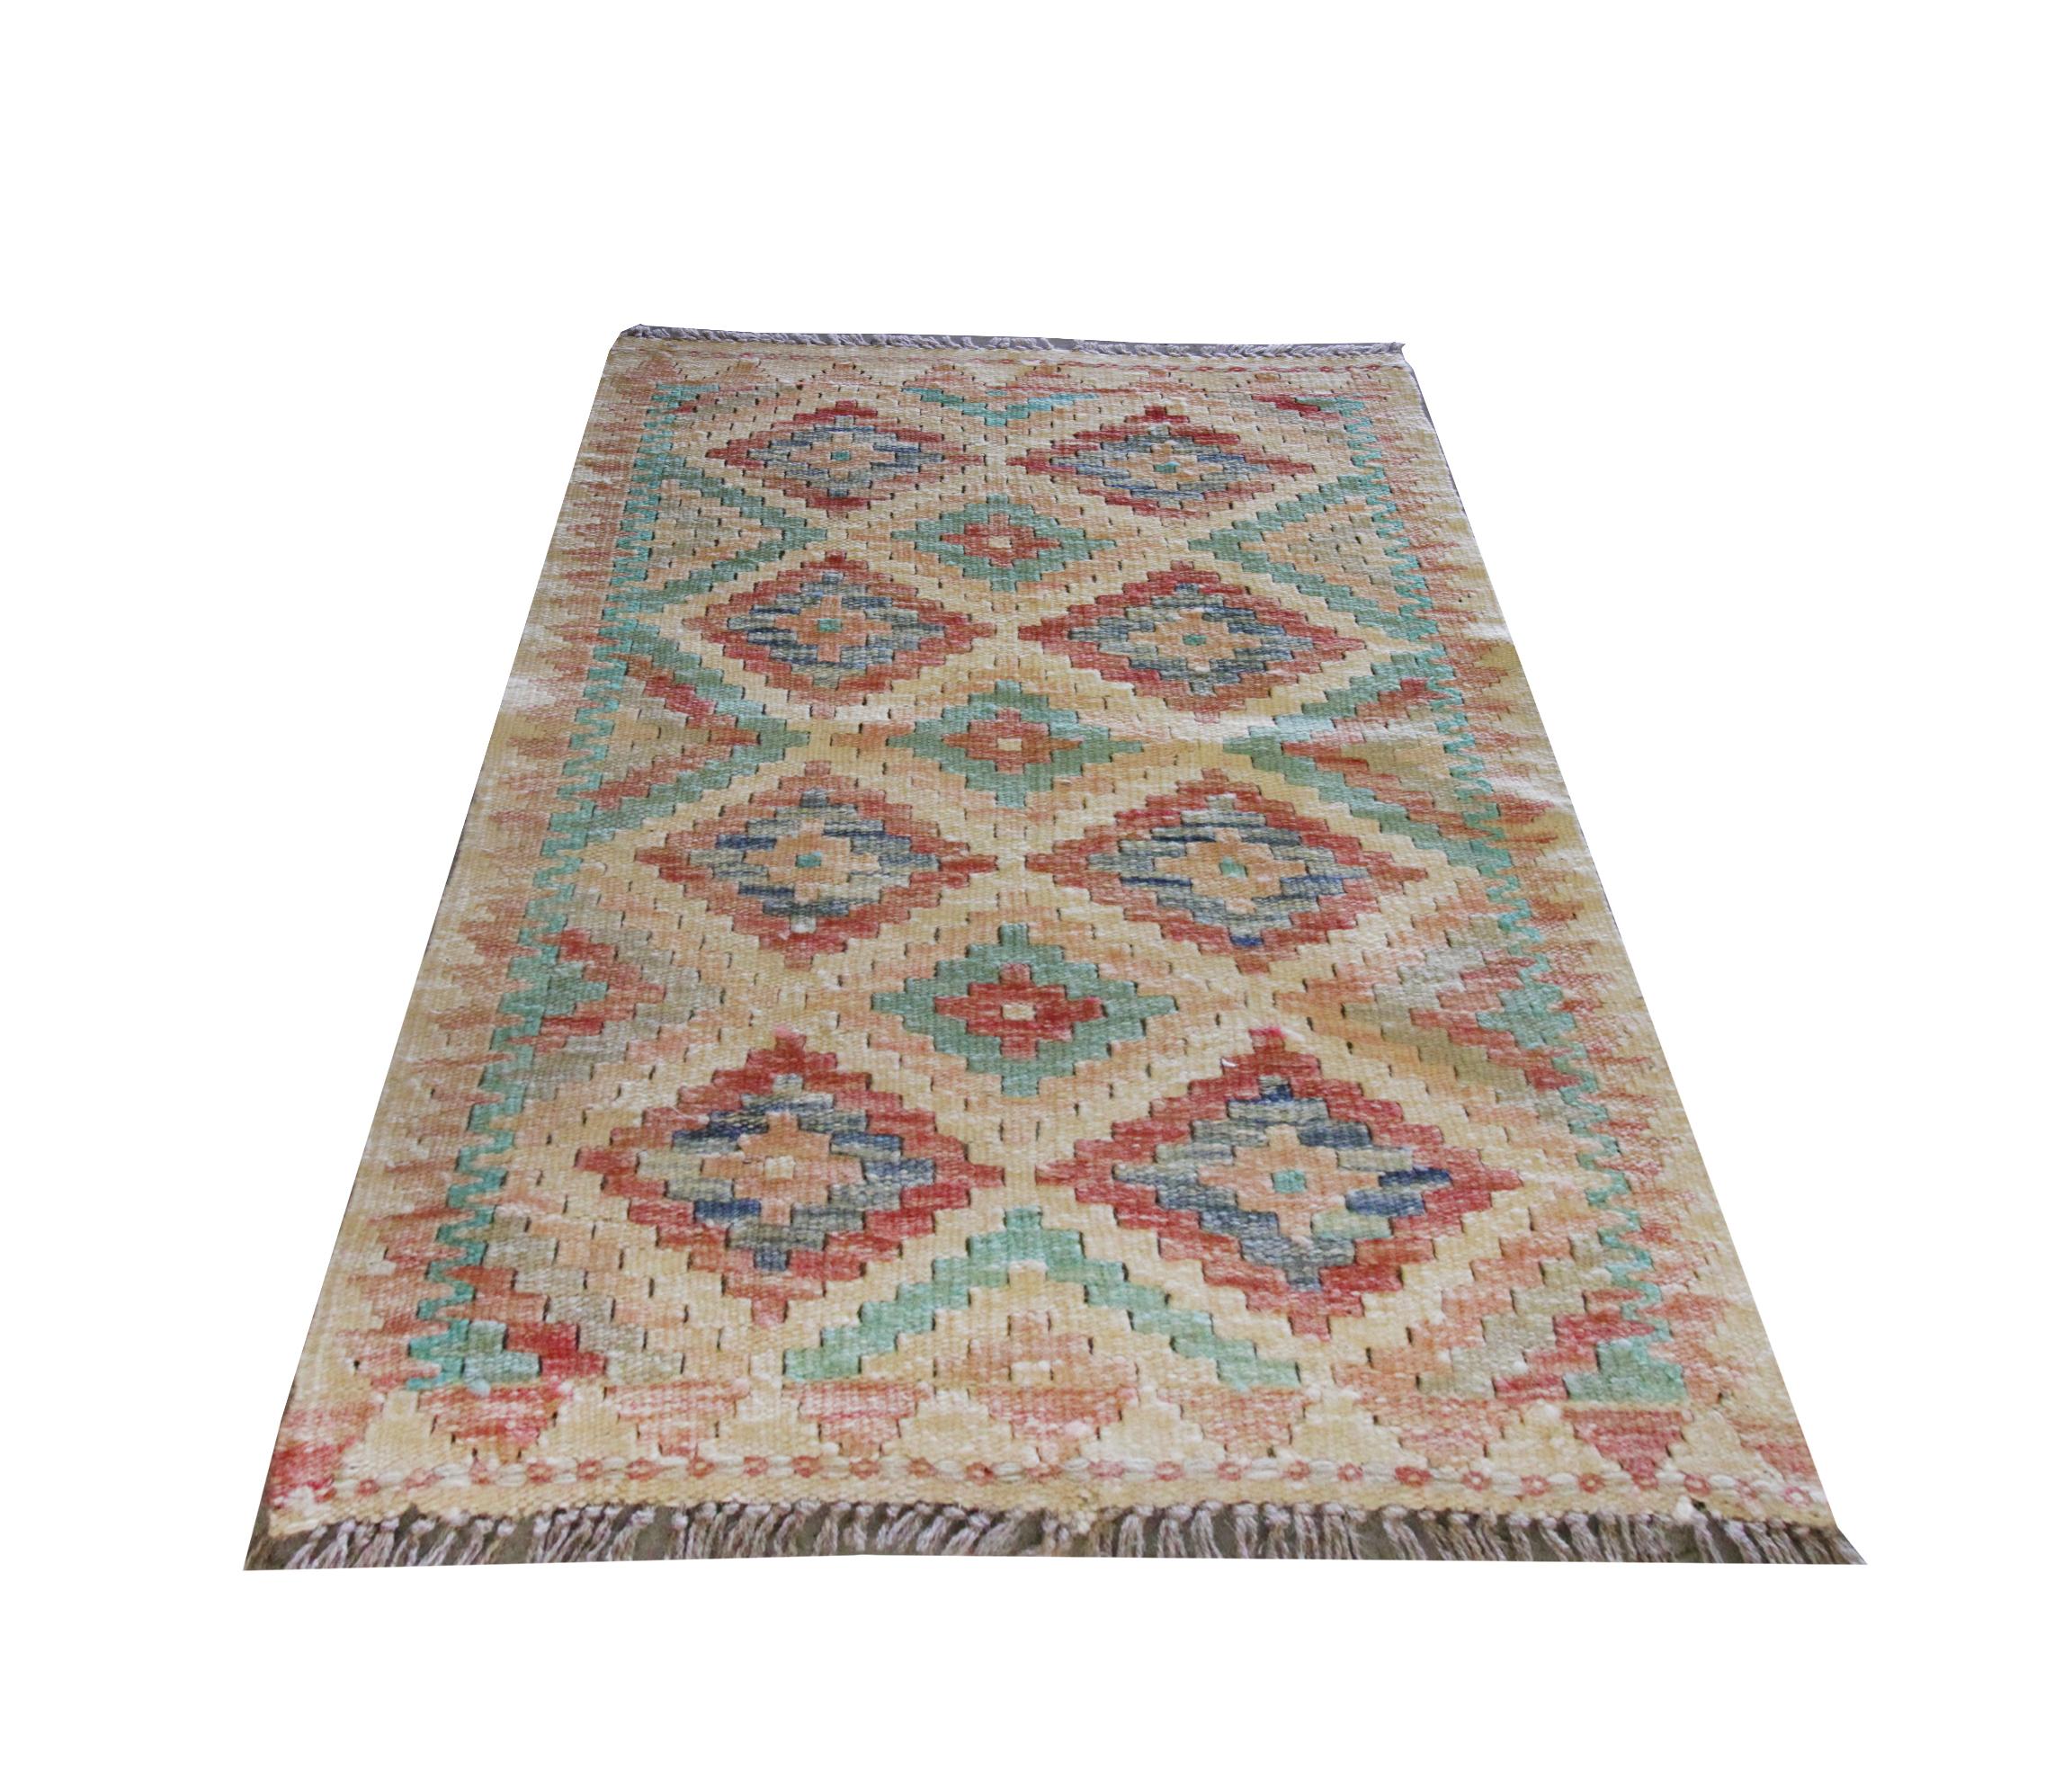 This small wool kilim is a handwoven area rug made in Afghanistan. The central pattern features symmetrical diamond motifs woven in red, blue, green and beige accent colours. This has then been framed by a repeating pattern border that encloses the